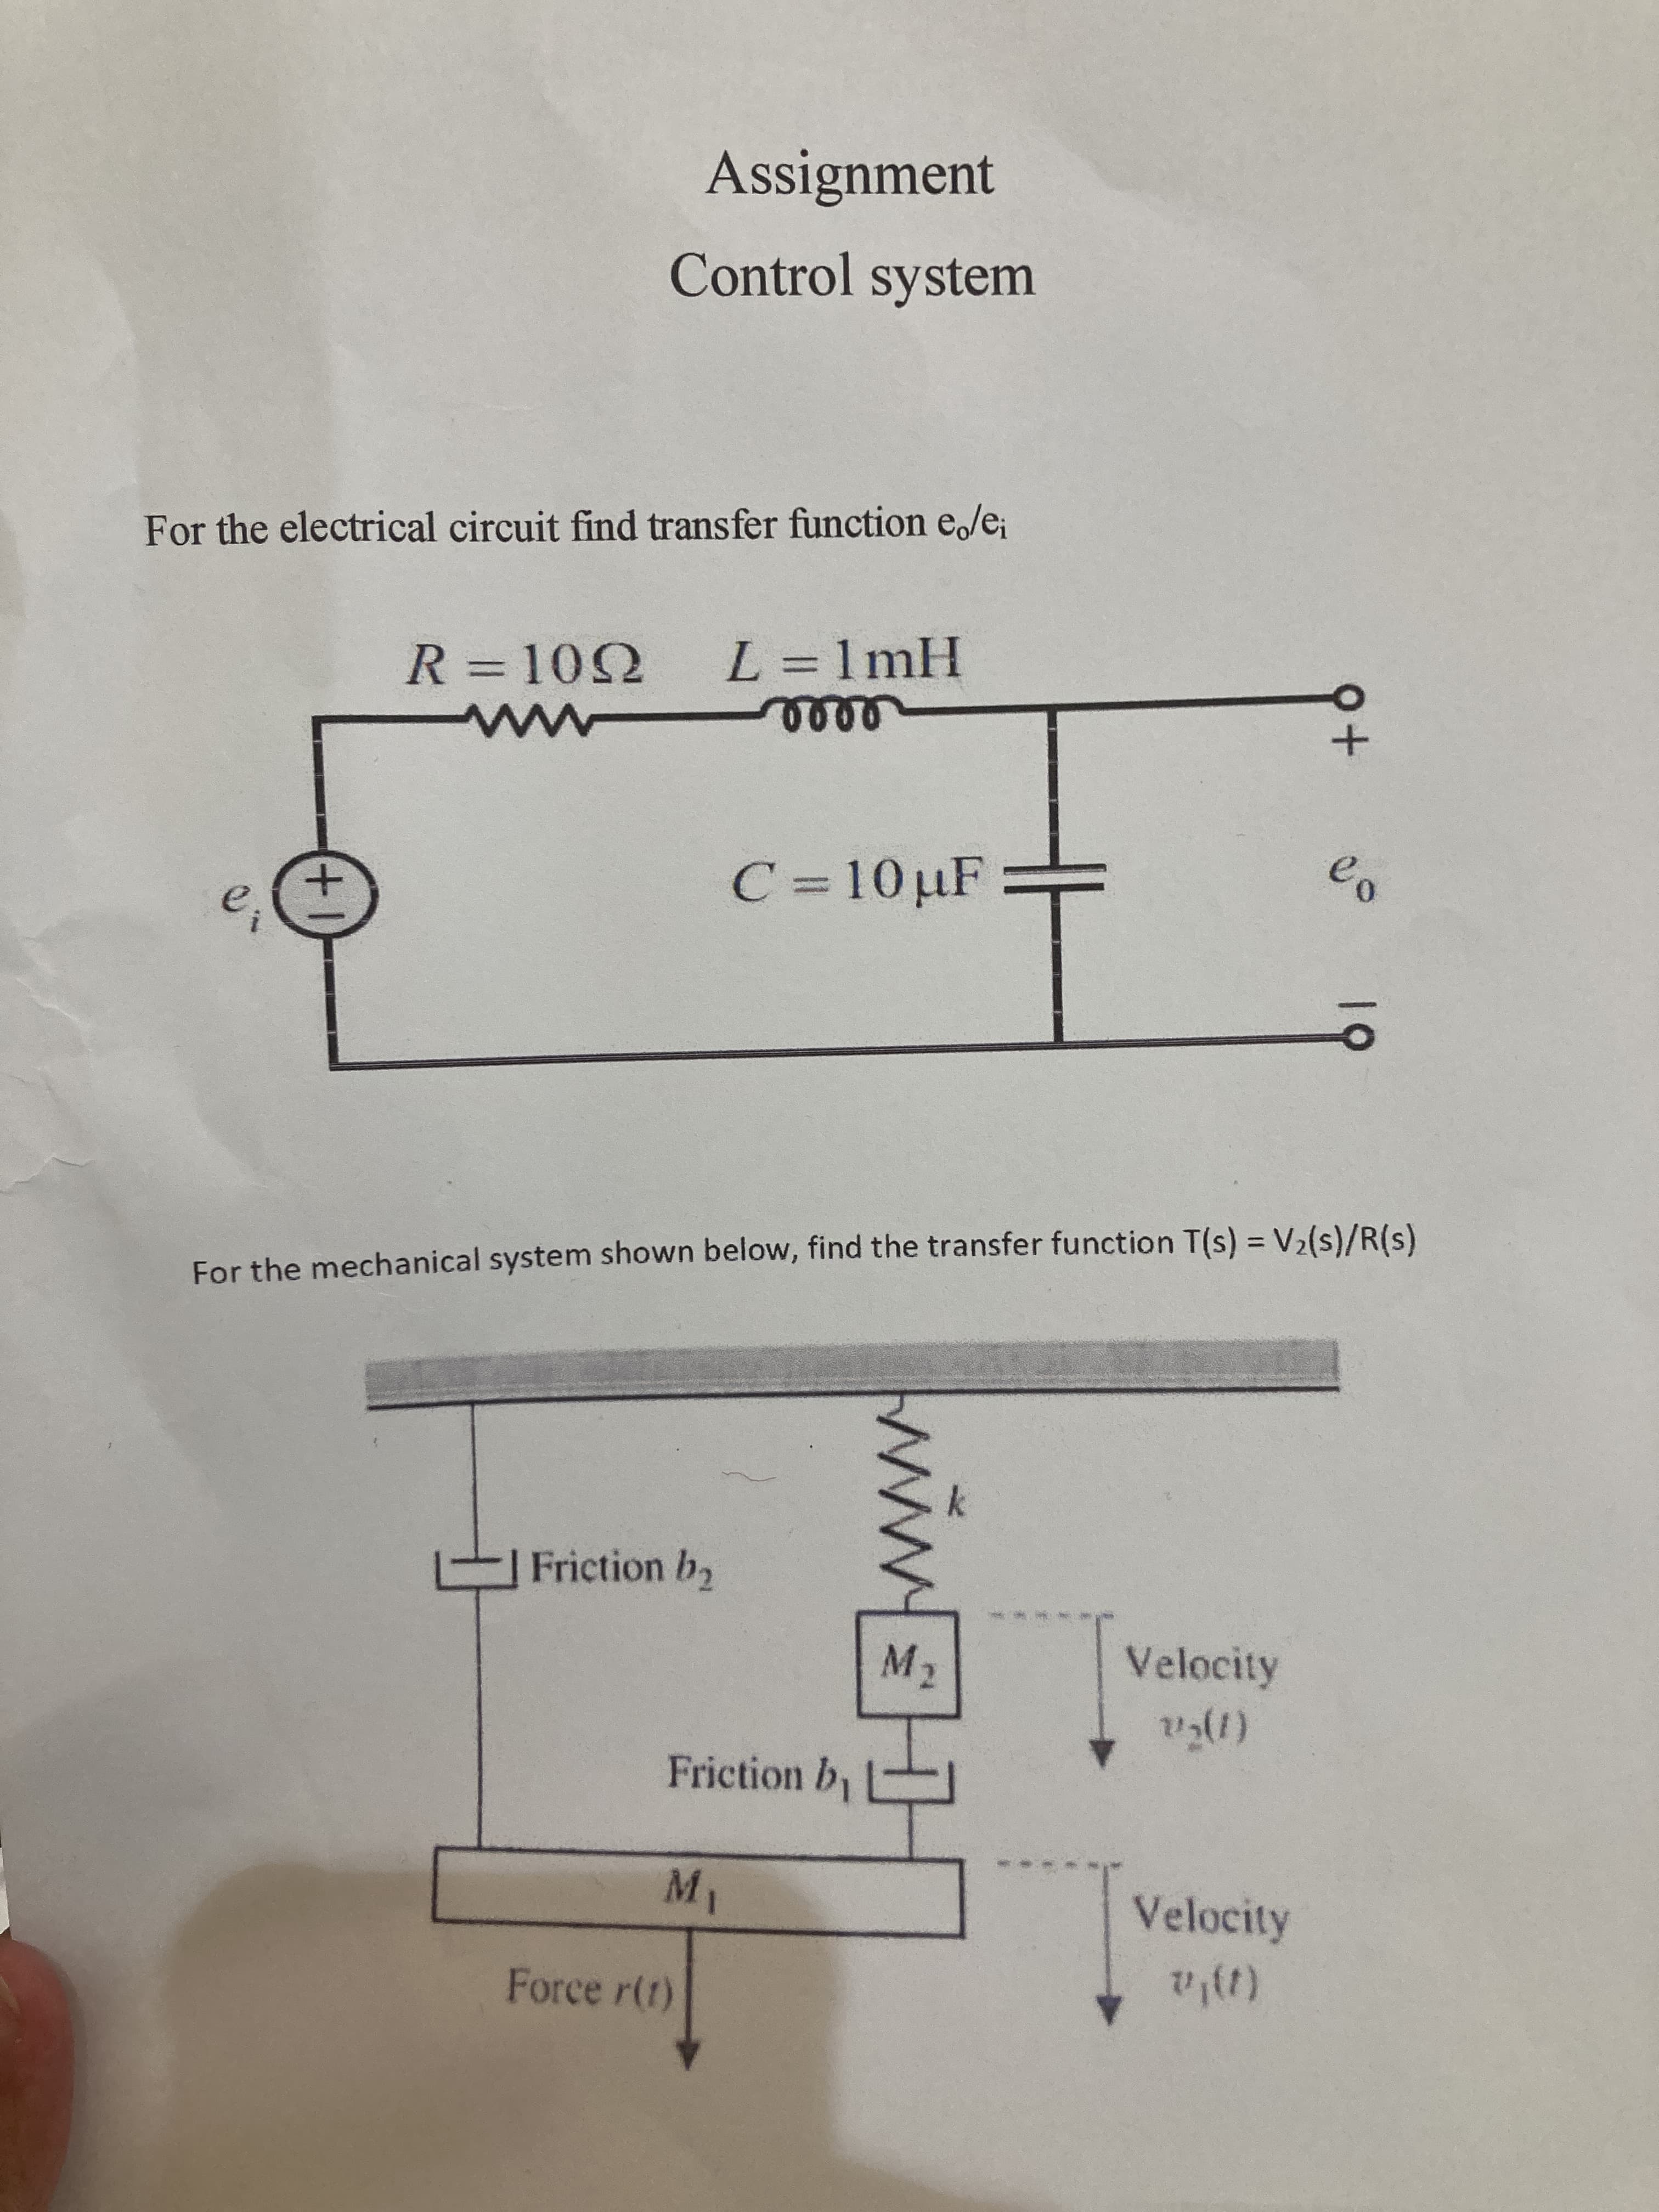 19
ww.
Assignment
Control system
For the electrical circuit find transfer function e/e;
R = 102 L= 1mH
%3D
0090
C=10µF
For the mechanical system shown below, find the transfer function T(s) = V2(s)/R(s)
Friction b2
M2
Velocity
Friction b
Velocity
Force r(t)
